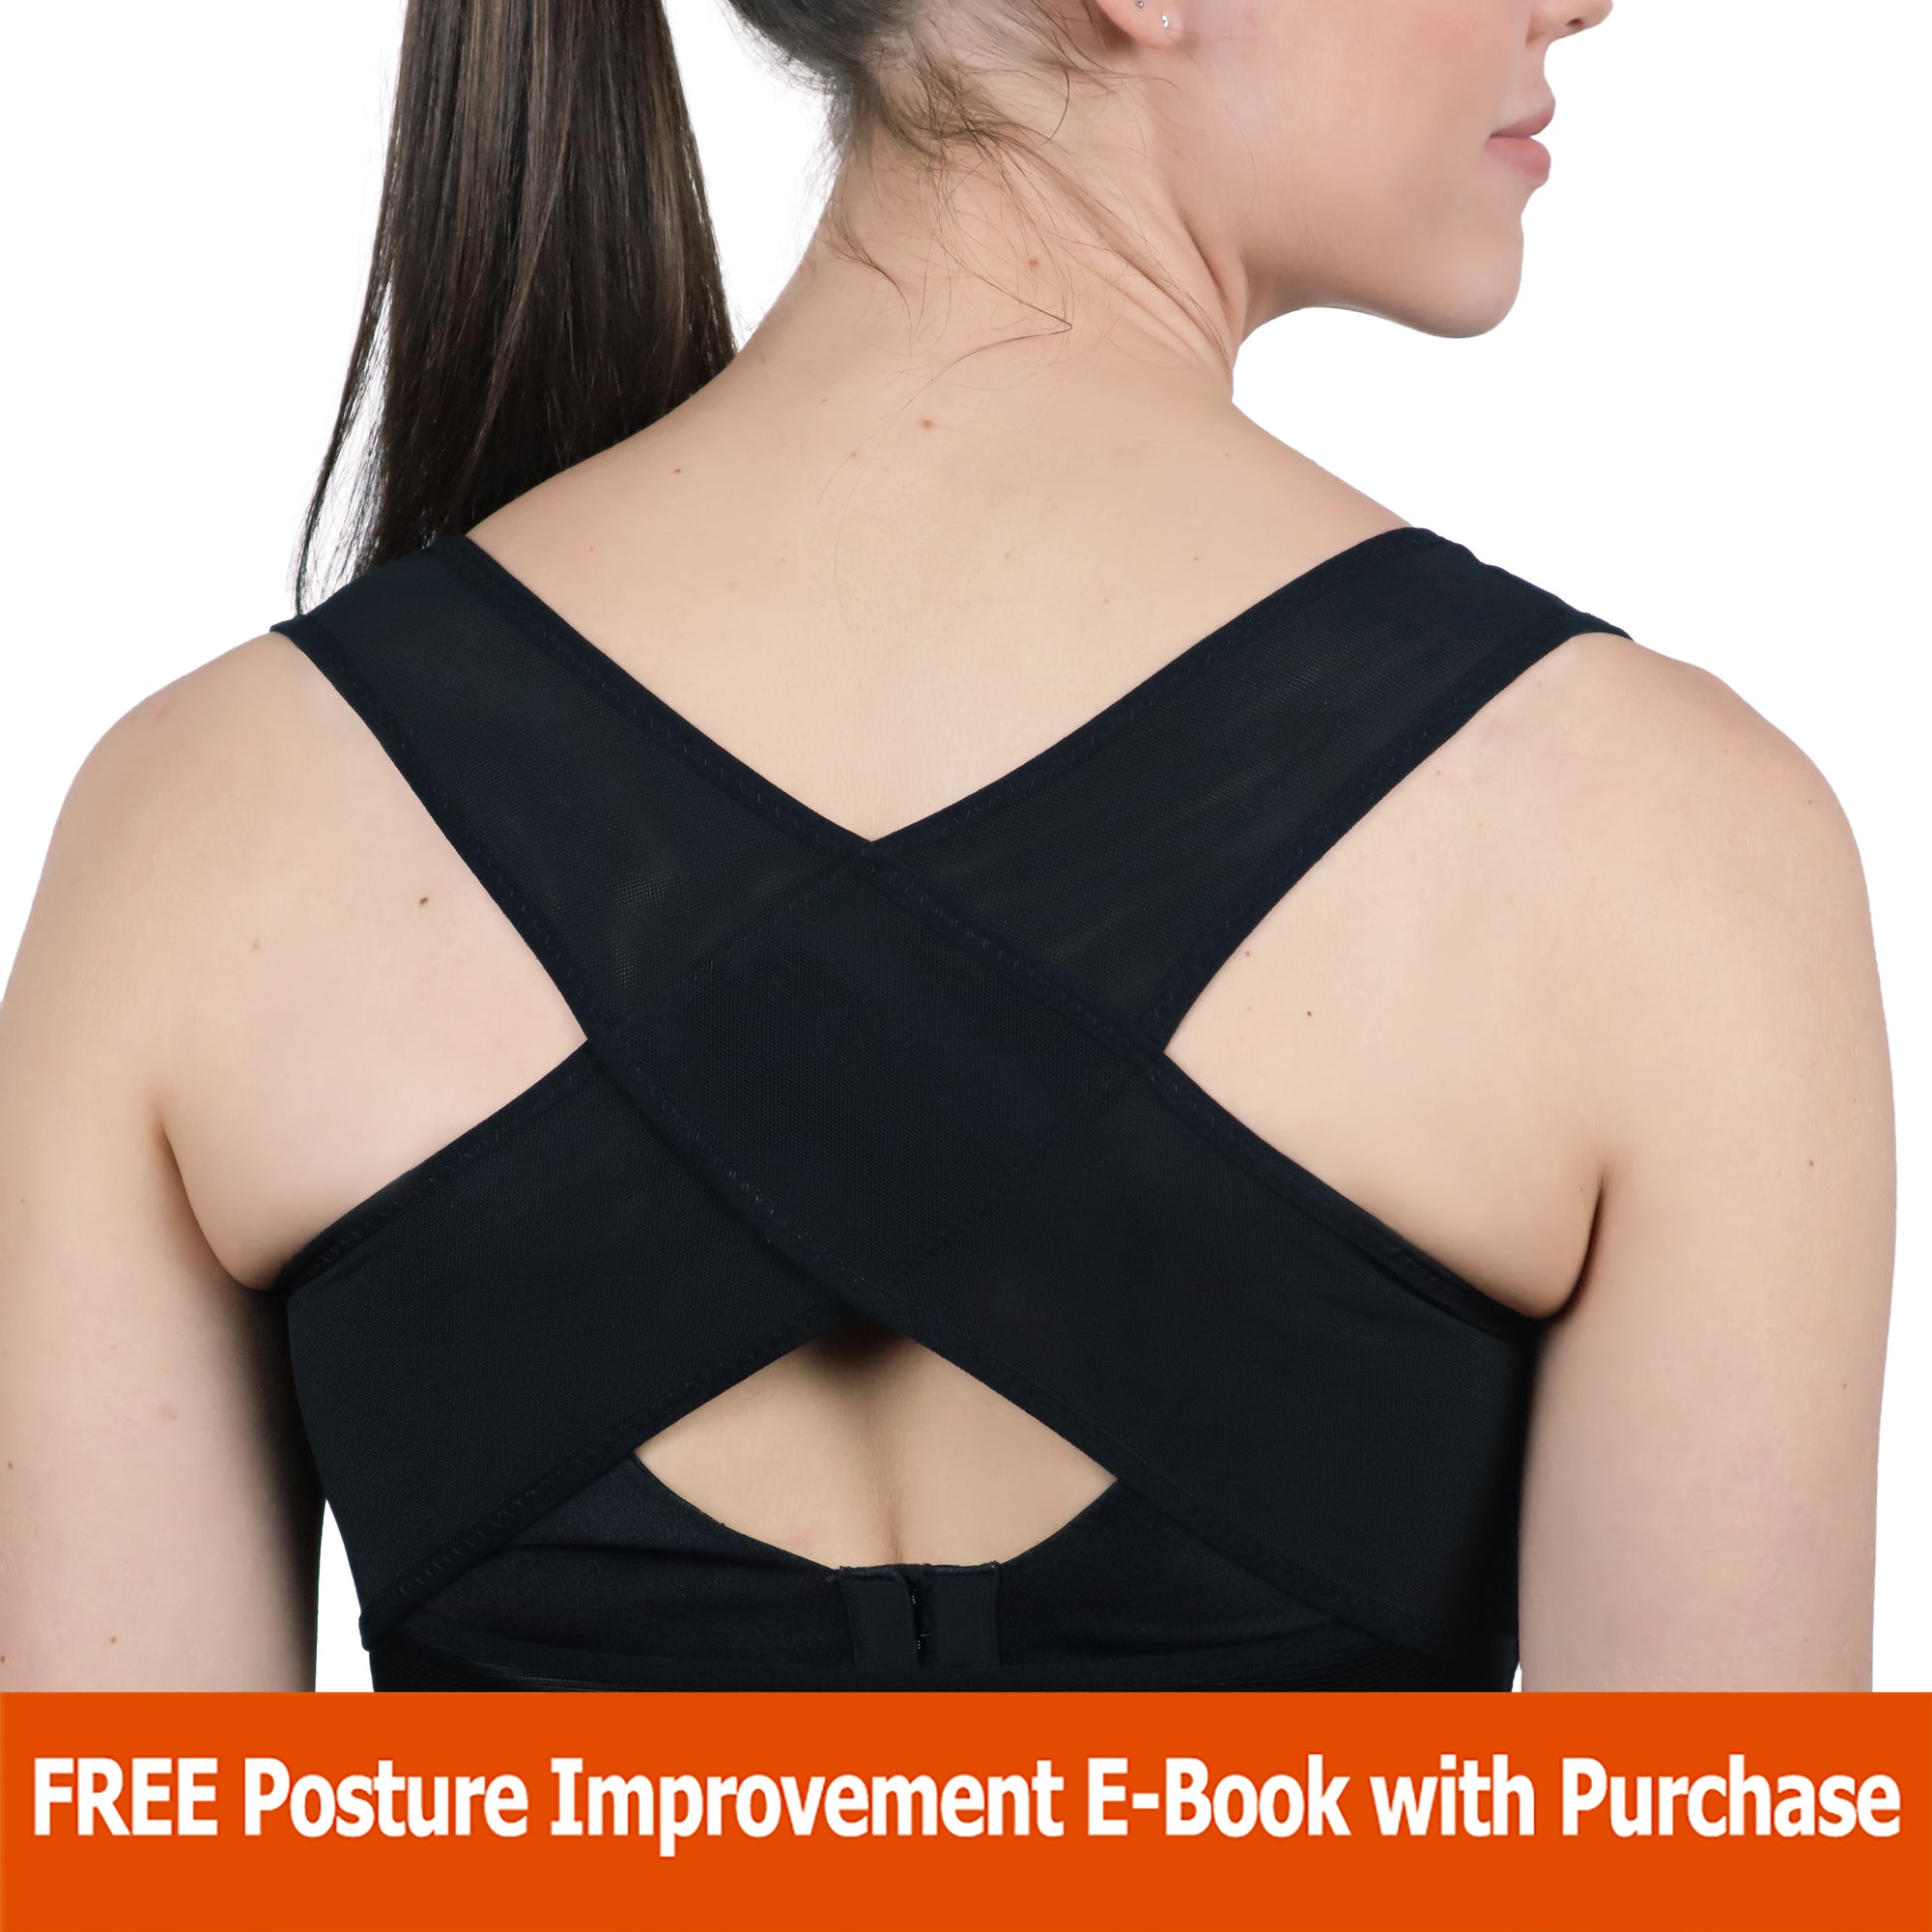 Women's Upper Back Support - The Natural Posture